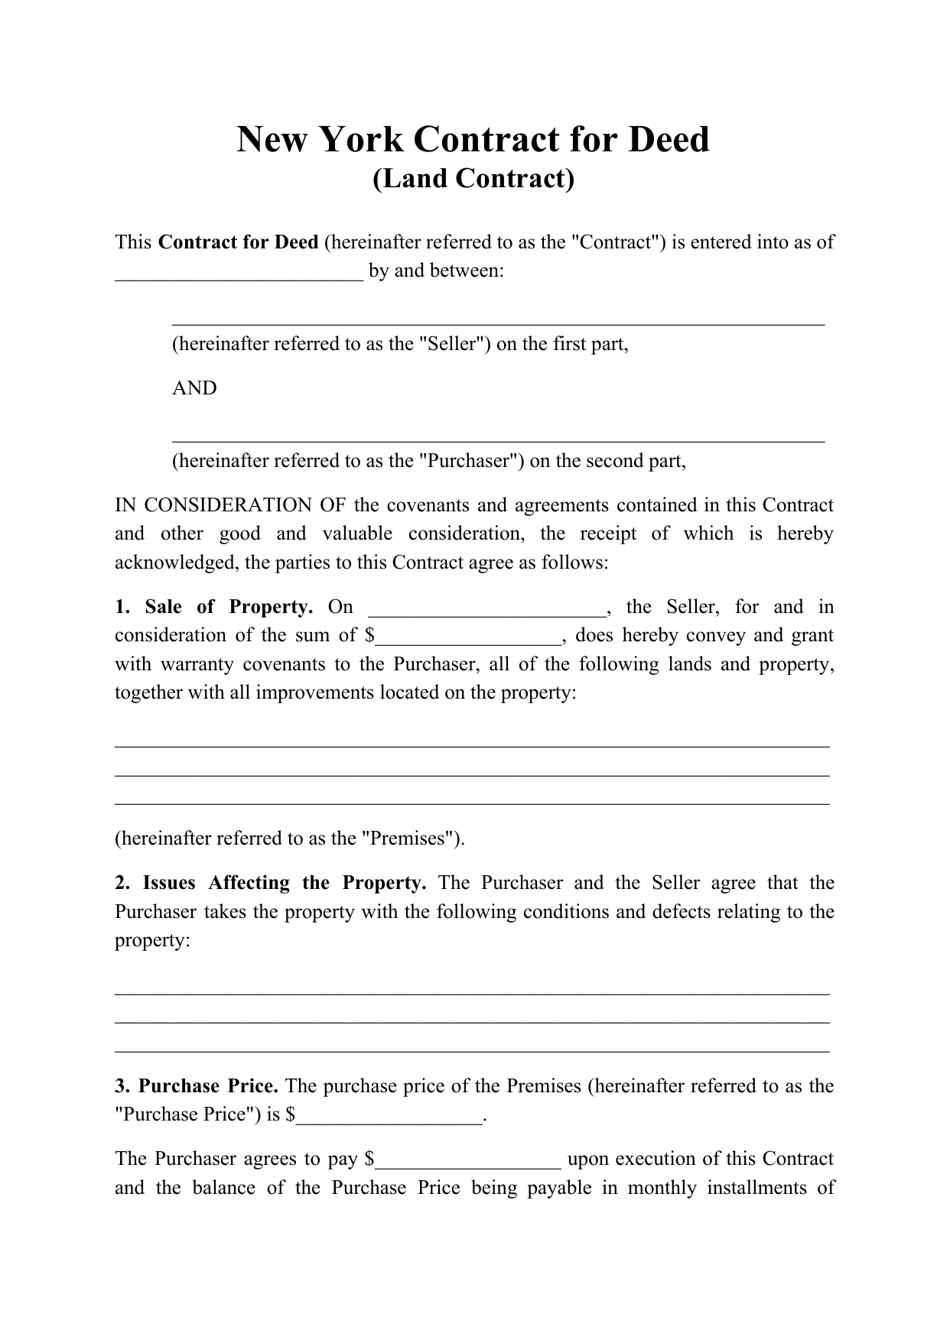 Contract for Deed (Land Contract) - New York, Page 1